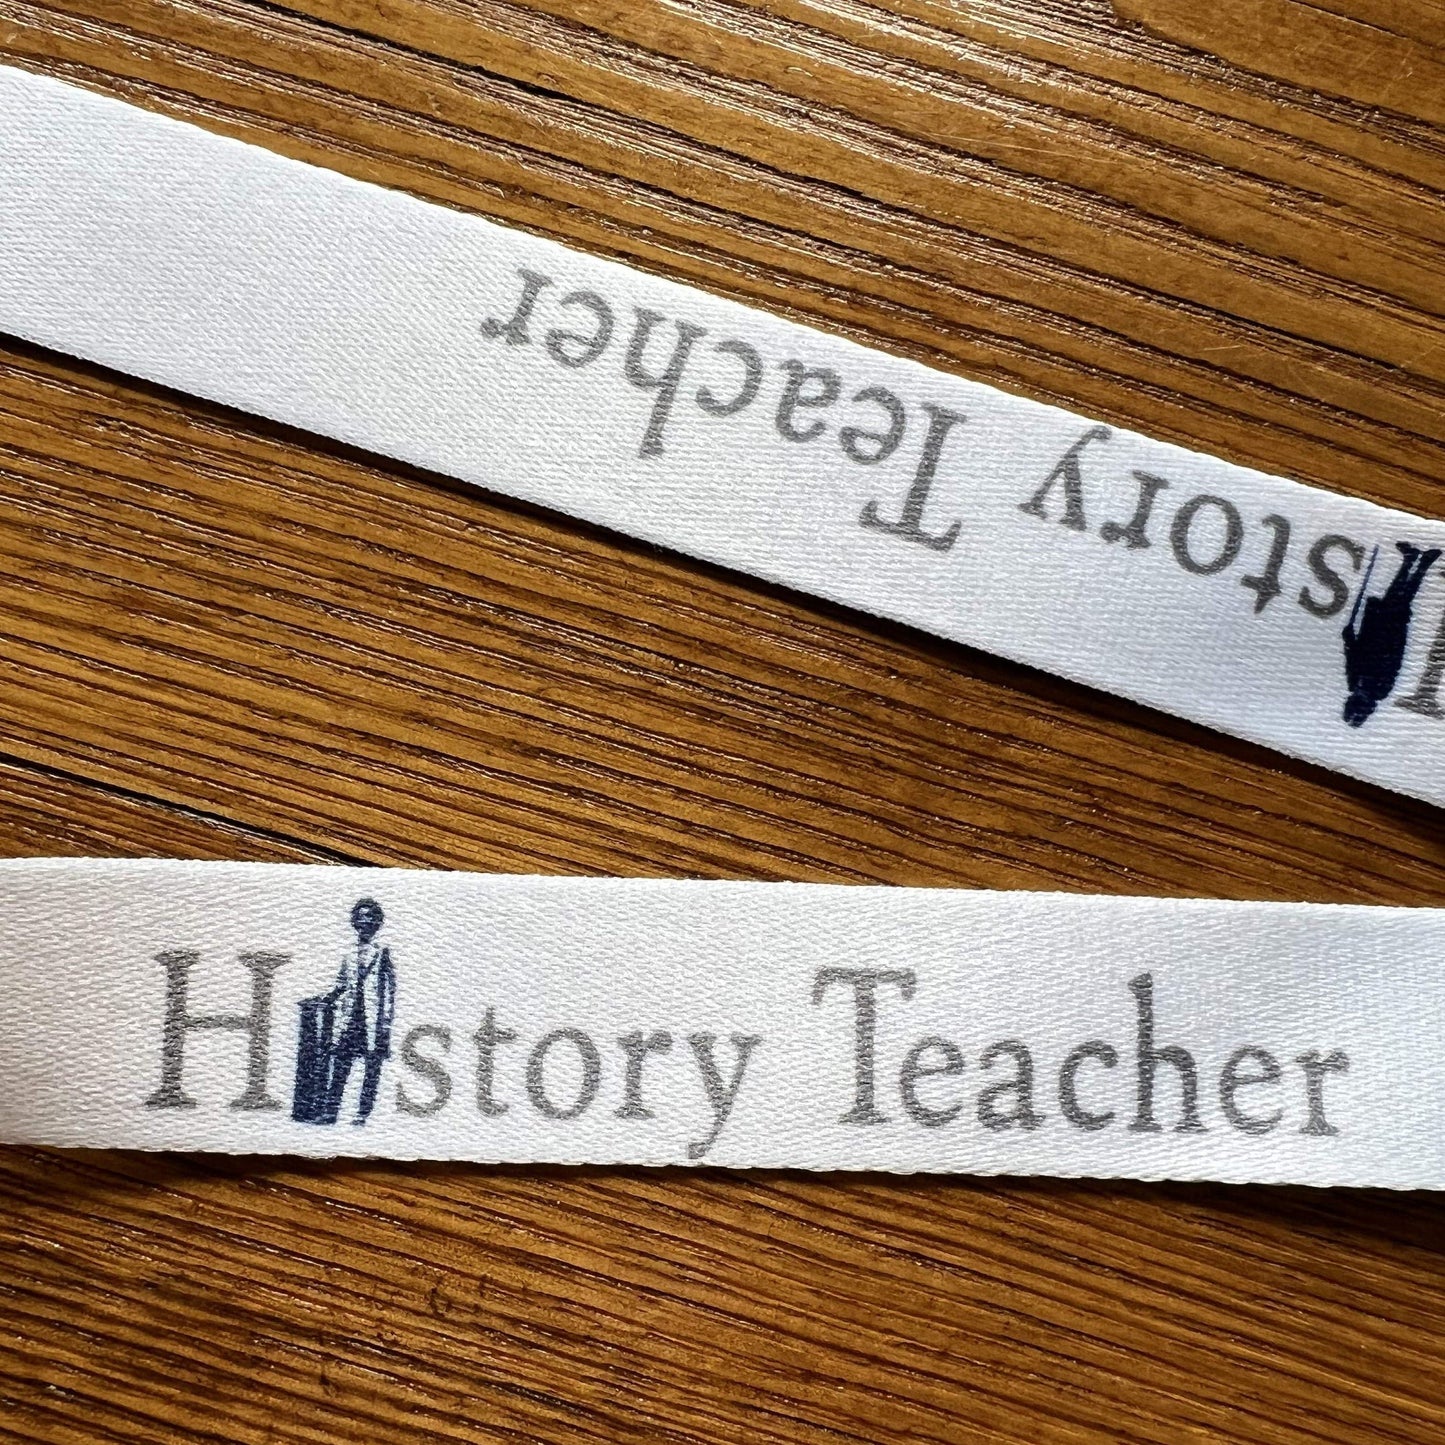 History Teacher Lanyard with Frederick Douglas from the History List store